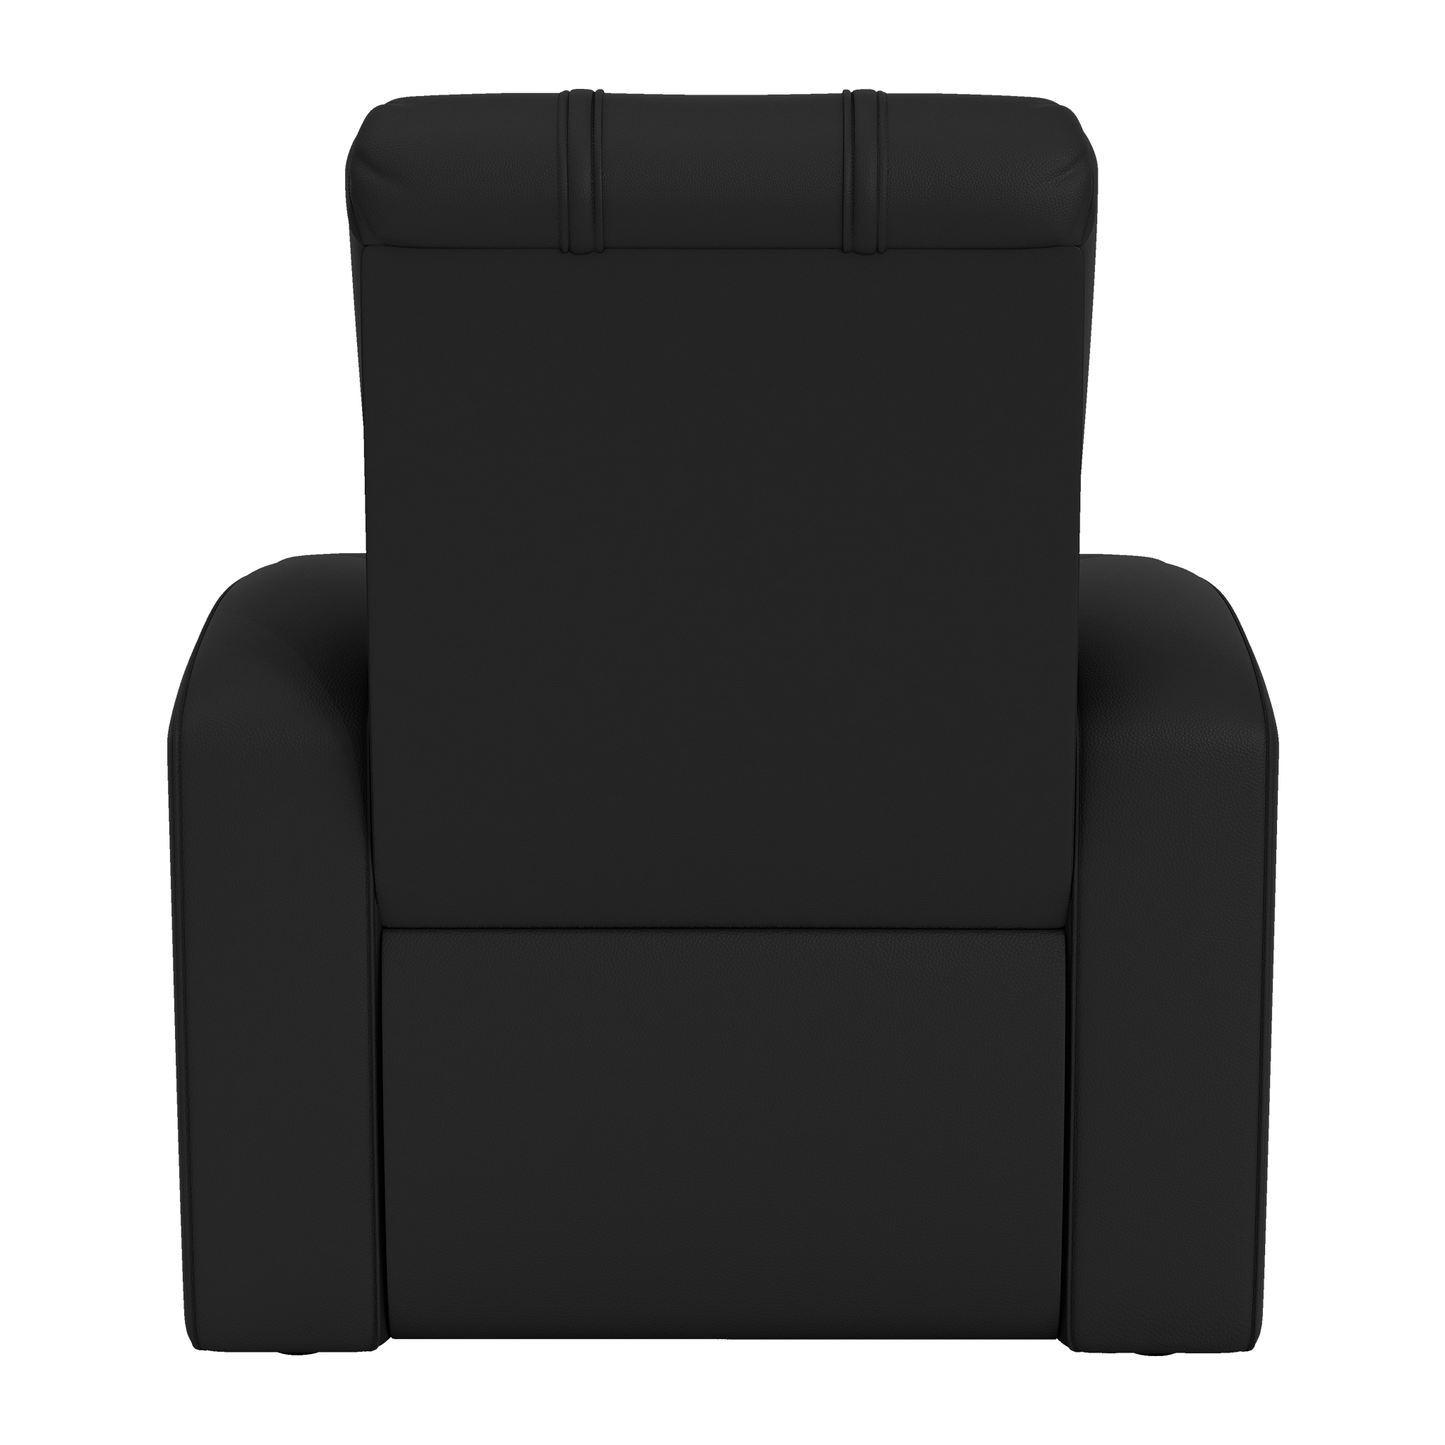 Relax Home Theater Recliner with Oakland Athletics Logo